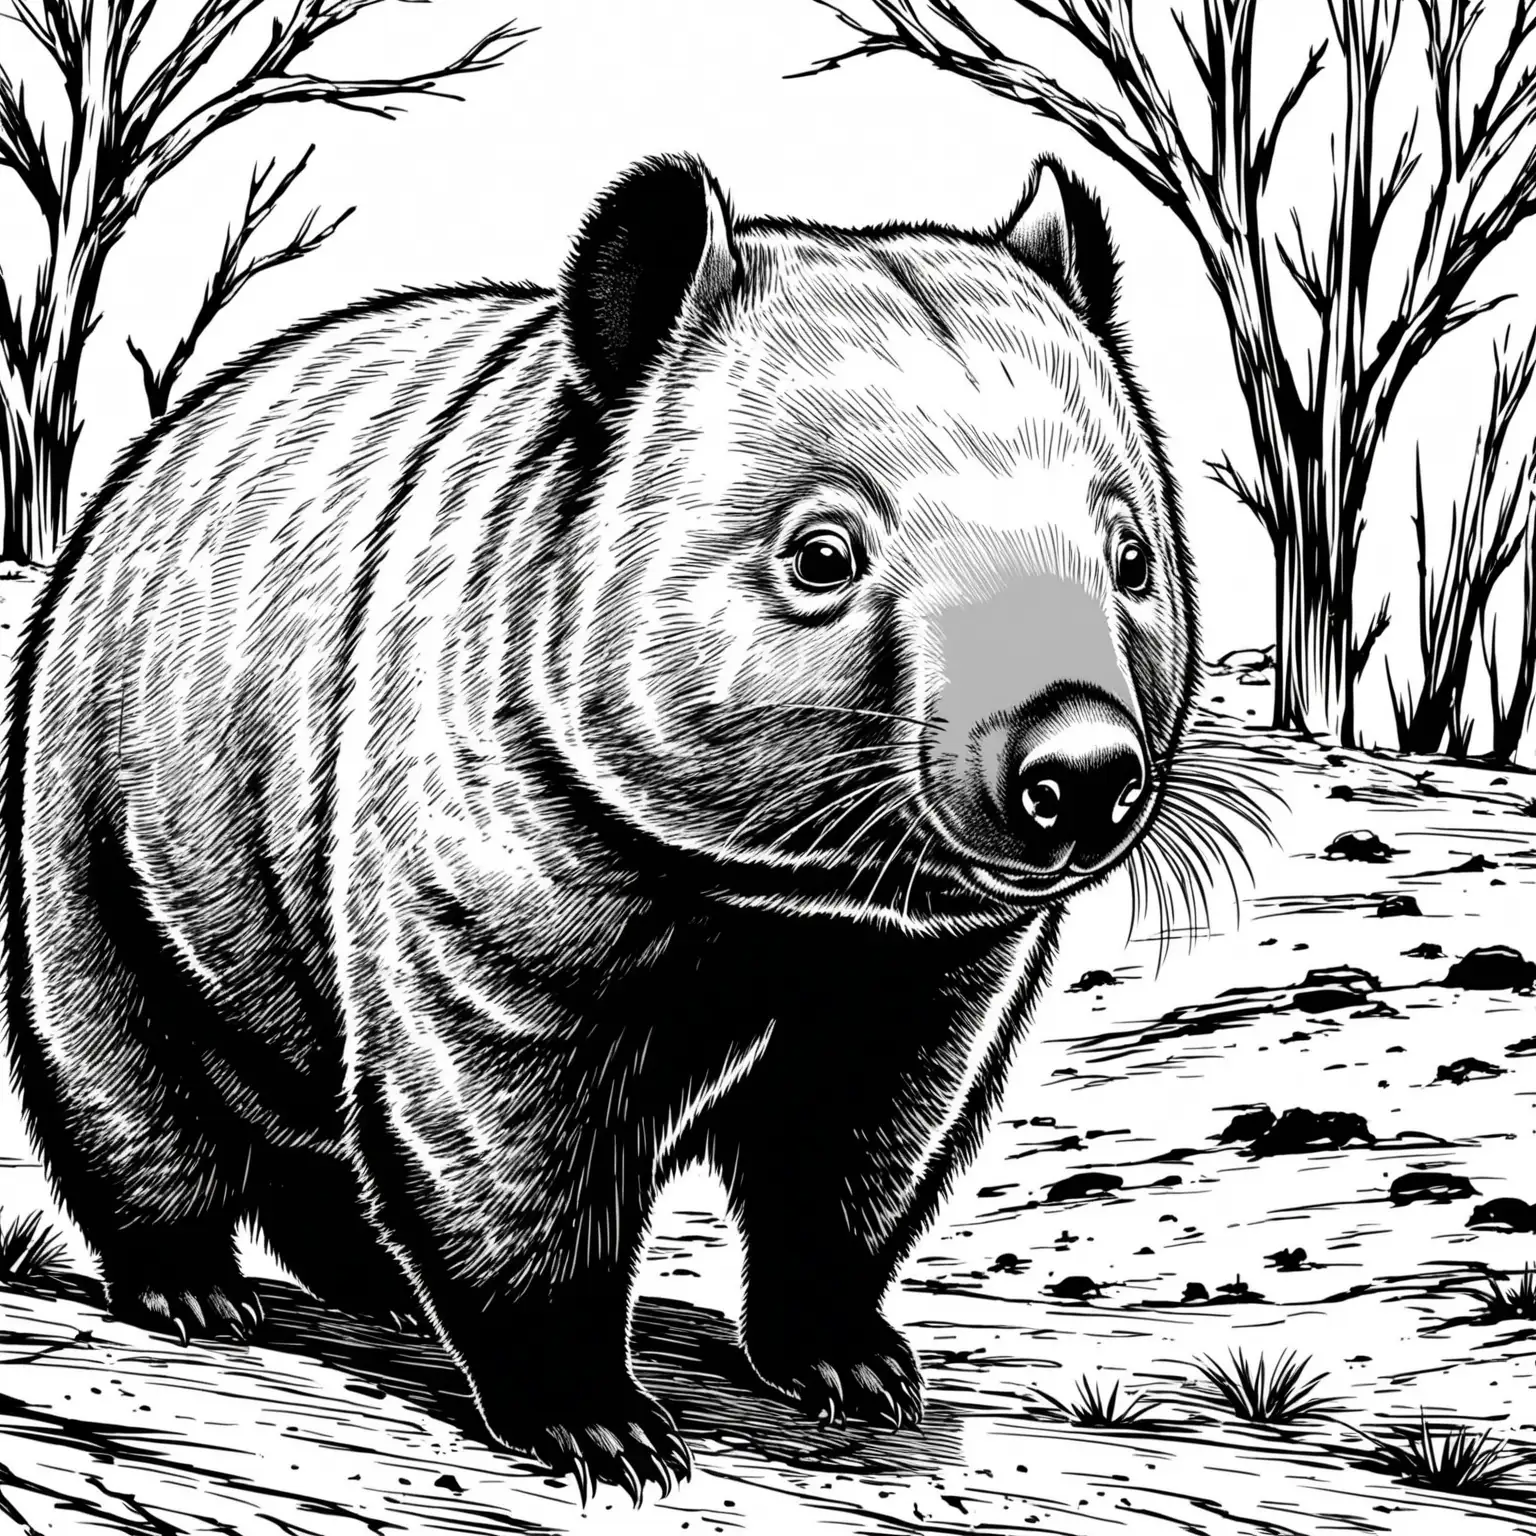 simple black and white drawing of a wombat up close in the Australian outback